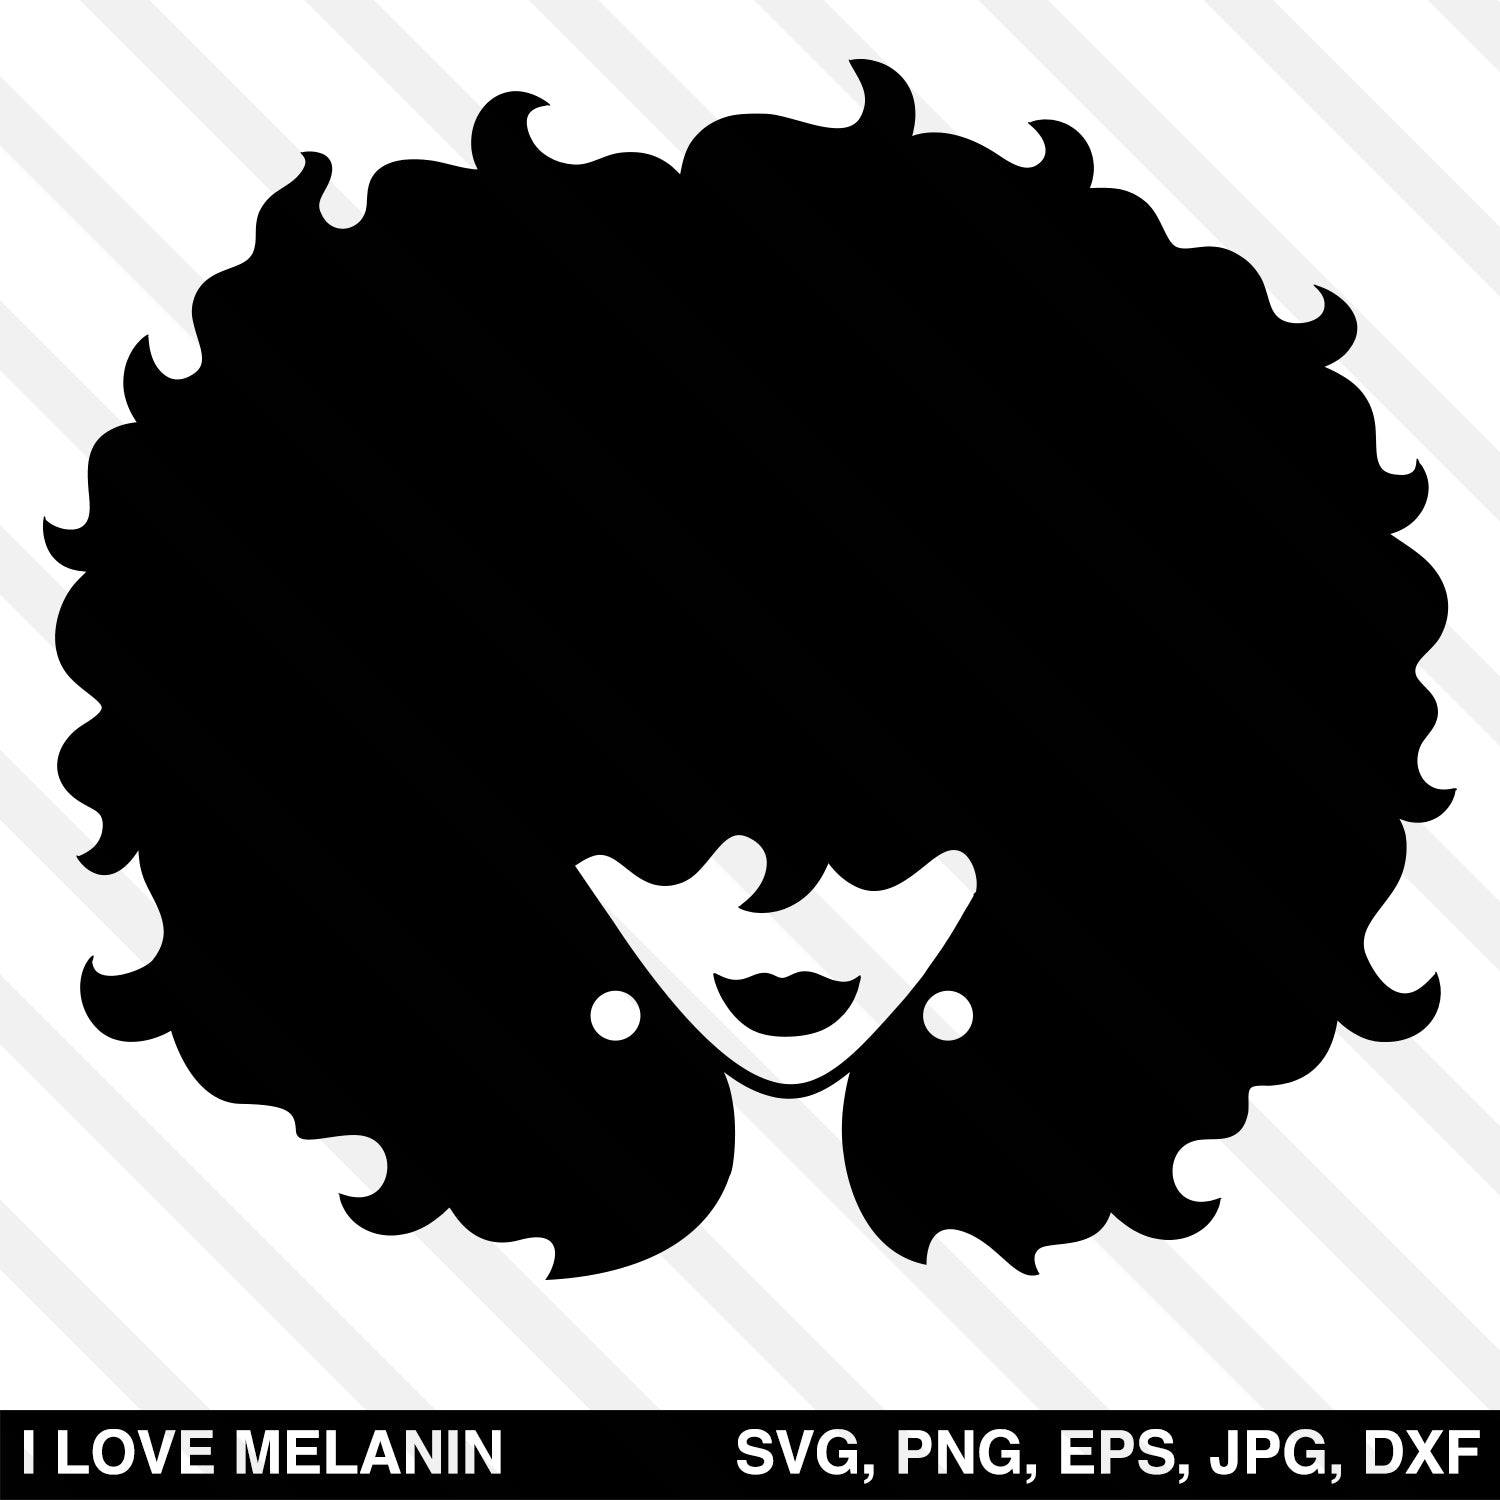 Download Afro Woman Silhouette SVG - I Love Melanin